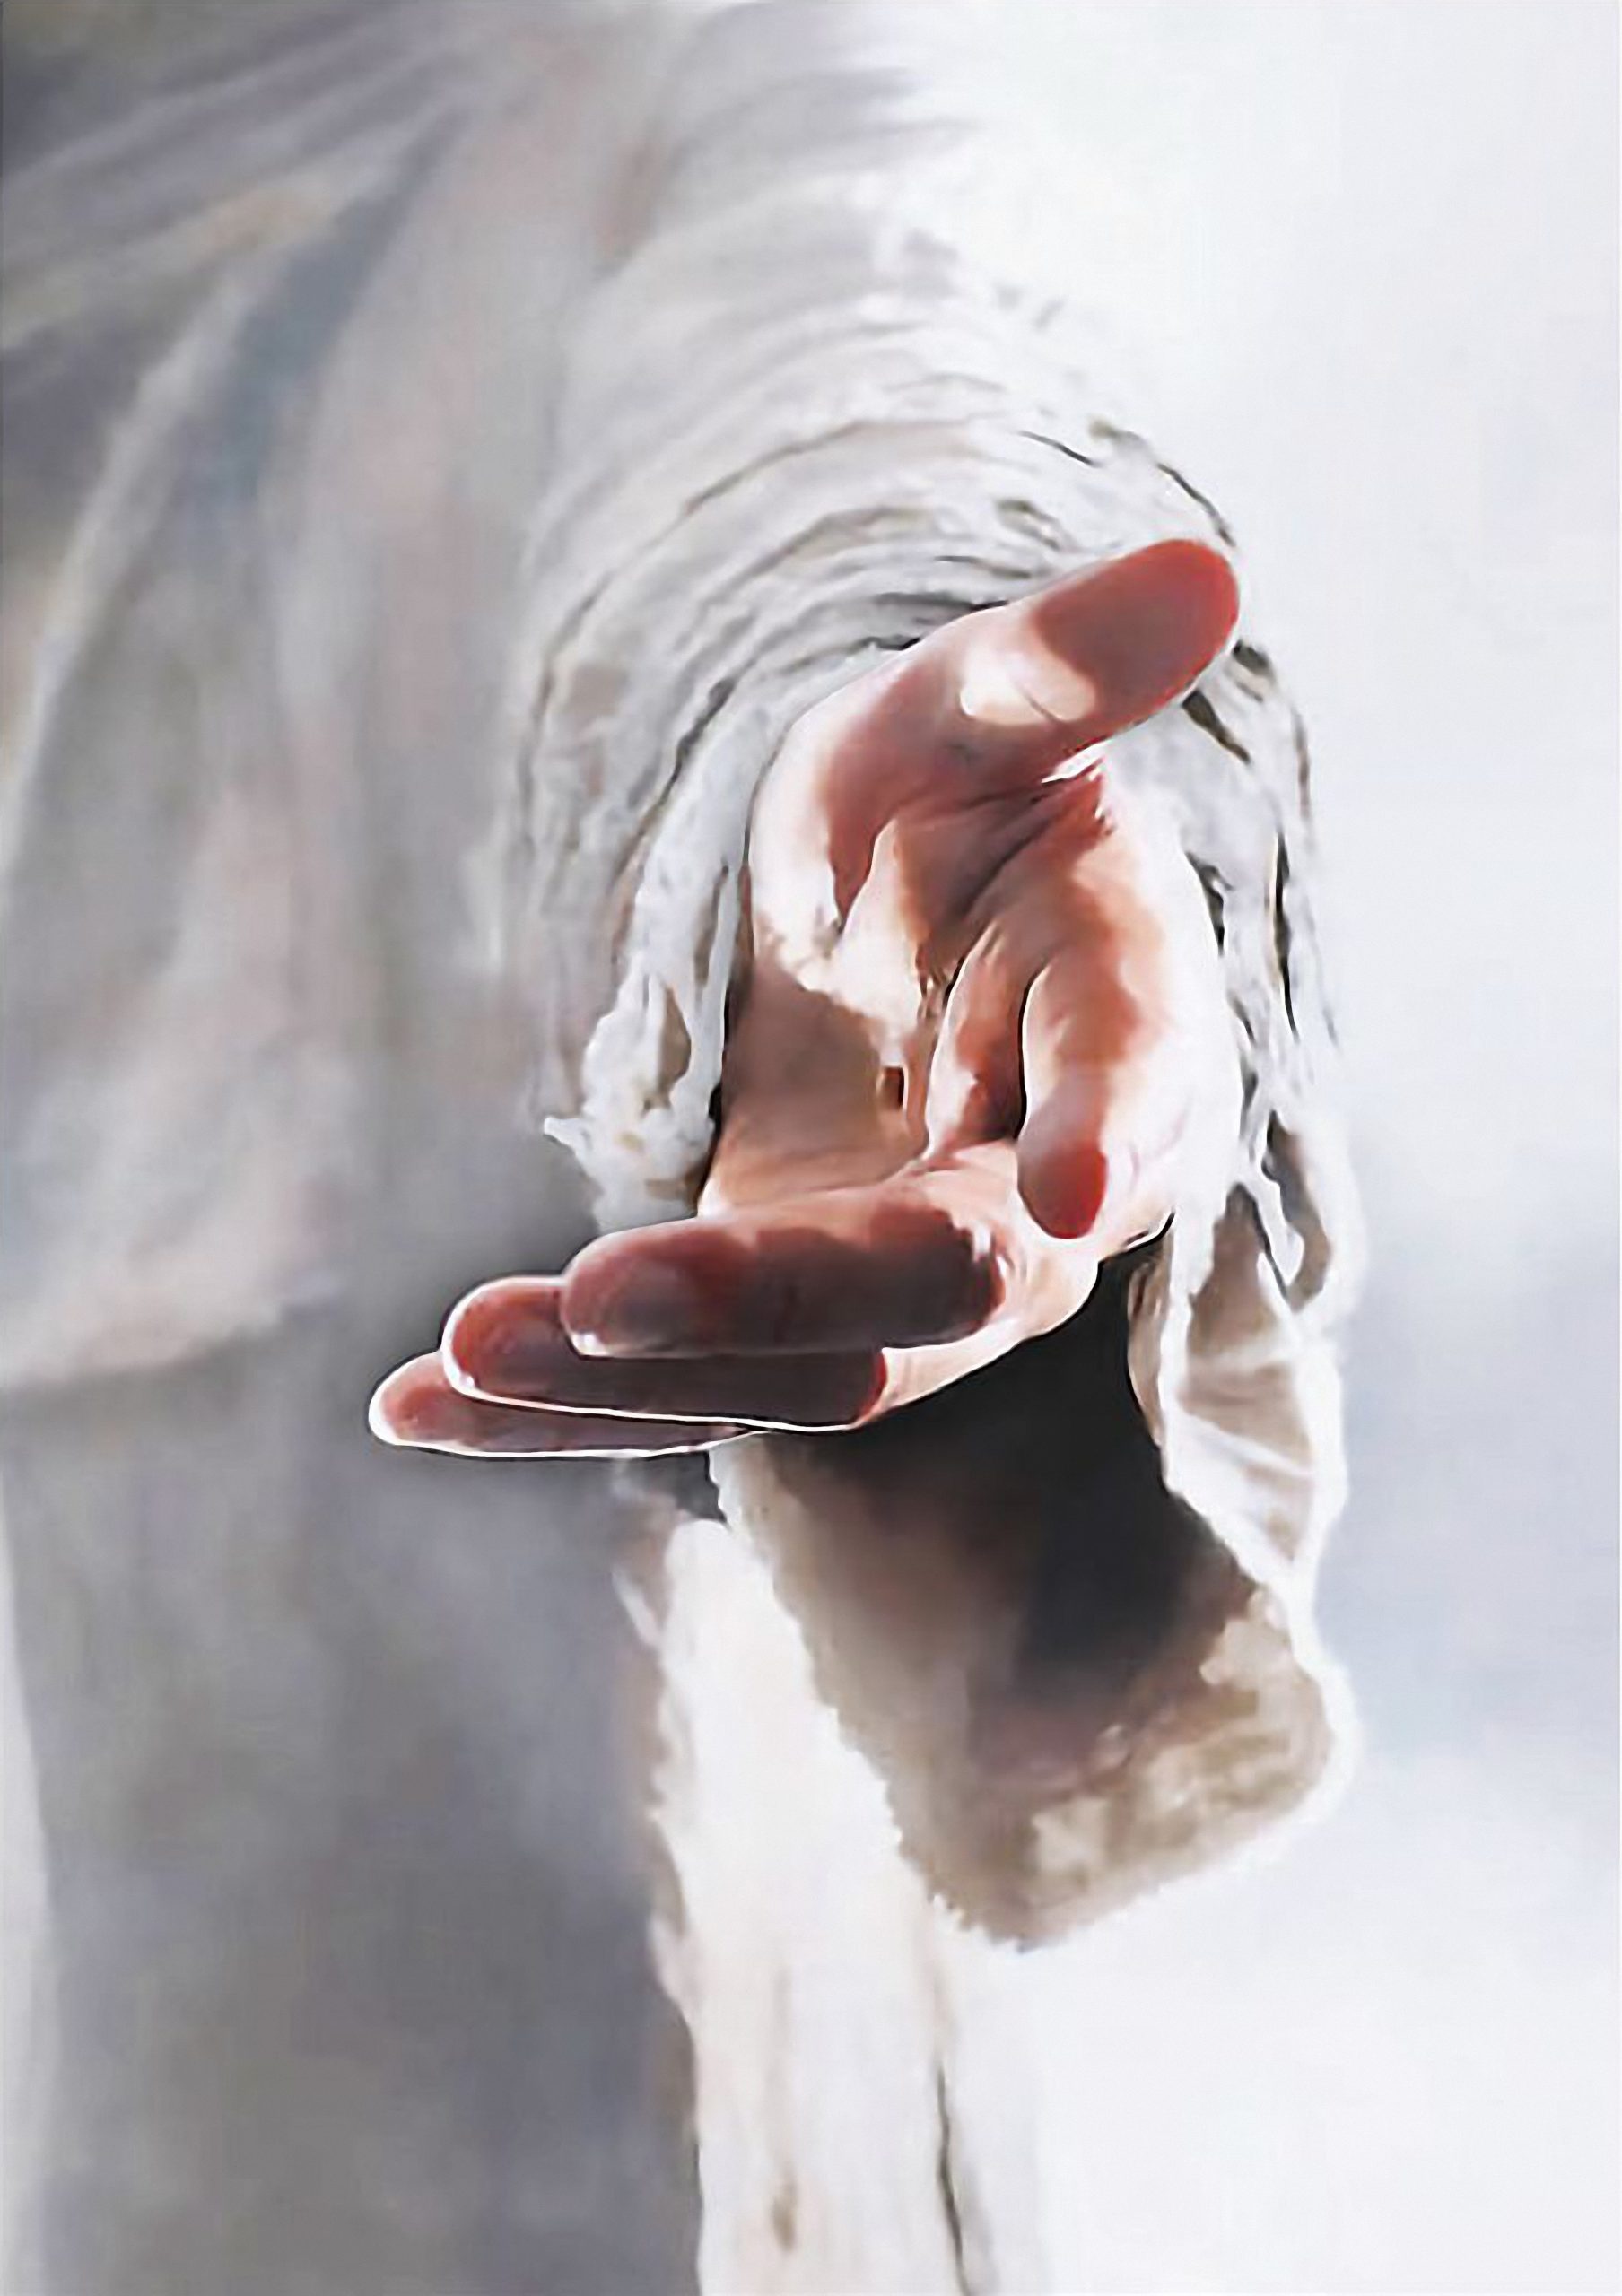 Jesus Christ Give me your hand poster